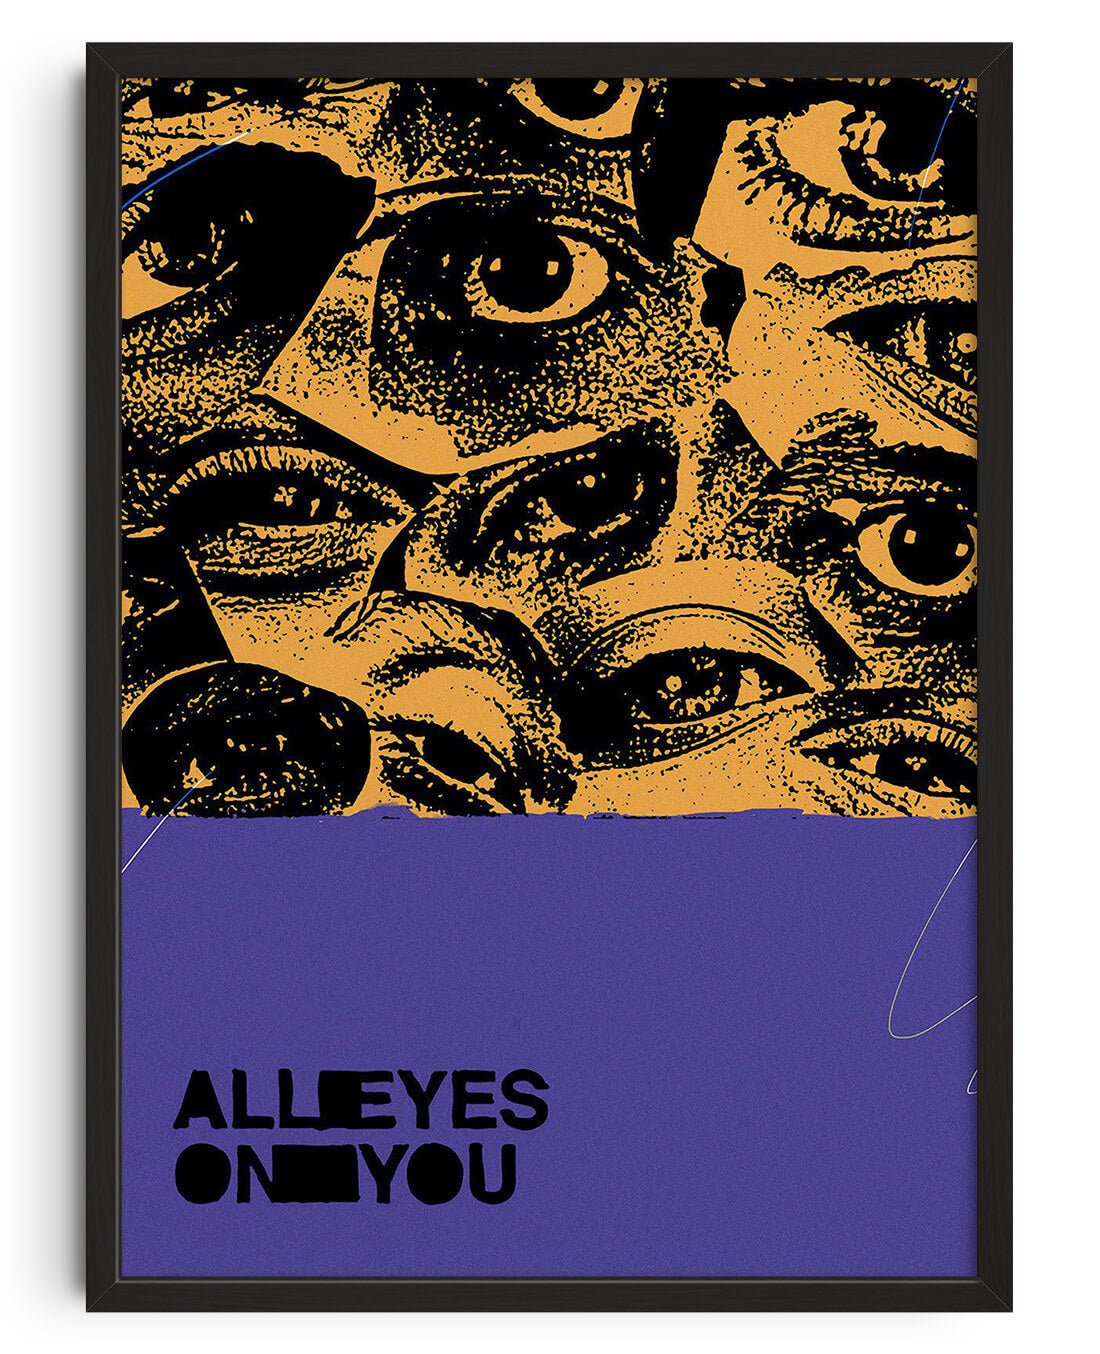 All eyes on you. by Jorge Santos contemporary wall art print from DROOL